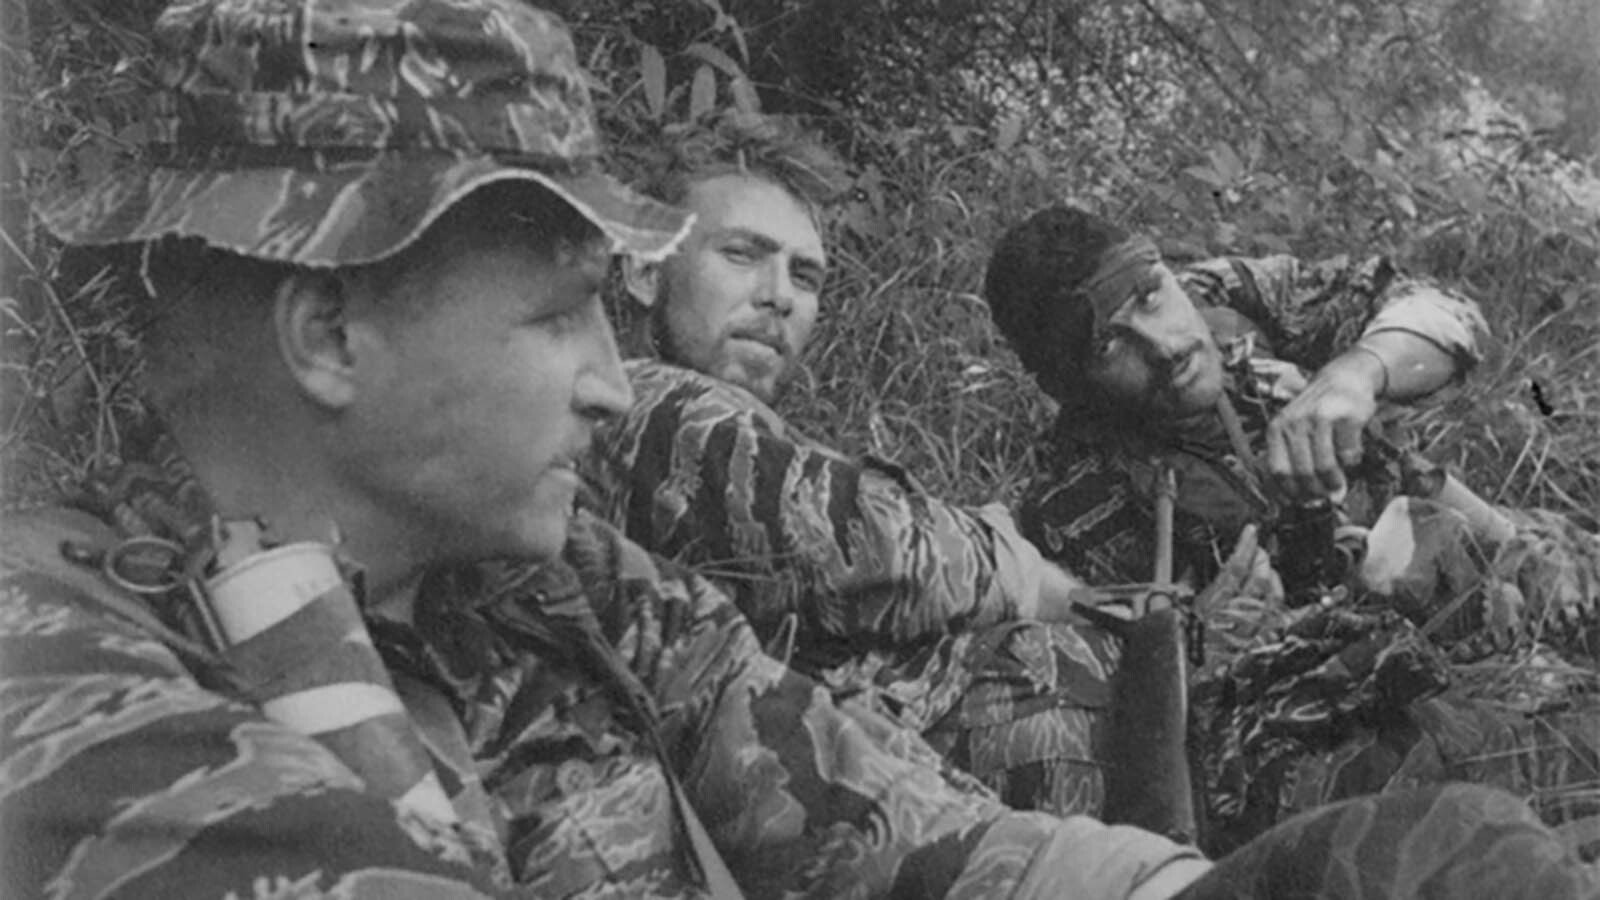 Staff Sgt. Drew Dix, center, and two members of U.S. Navy SEAL Team 2 rest after engaging the enemy during the reconnaissance operation they were conducting when the Viet Cong initially invaded the city pf Chau Phu.